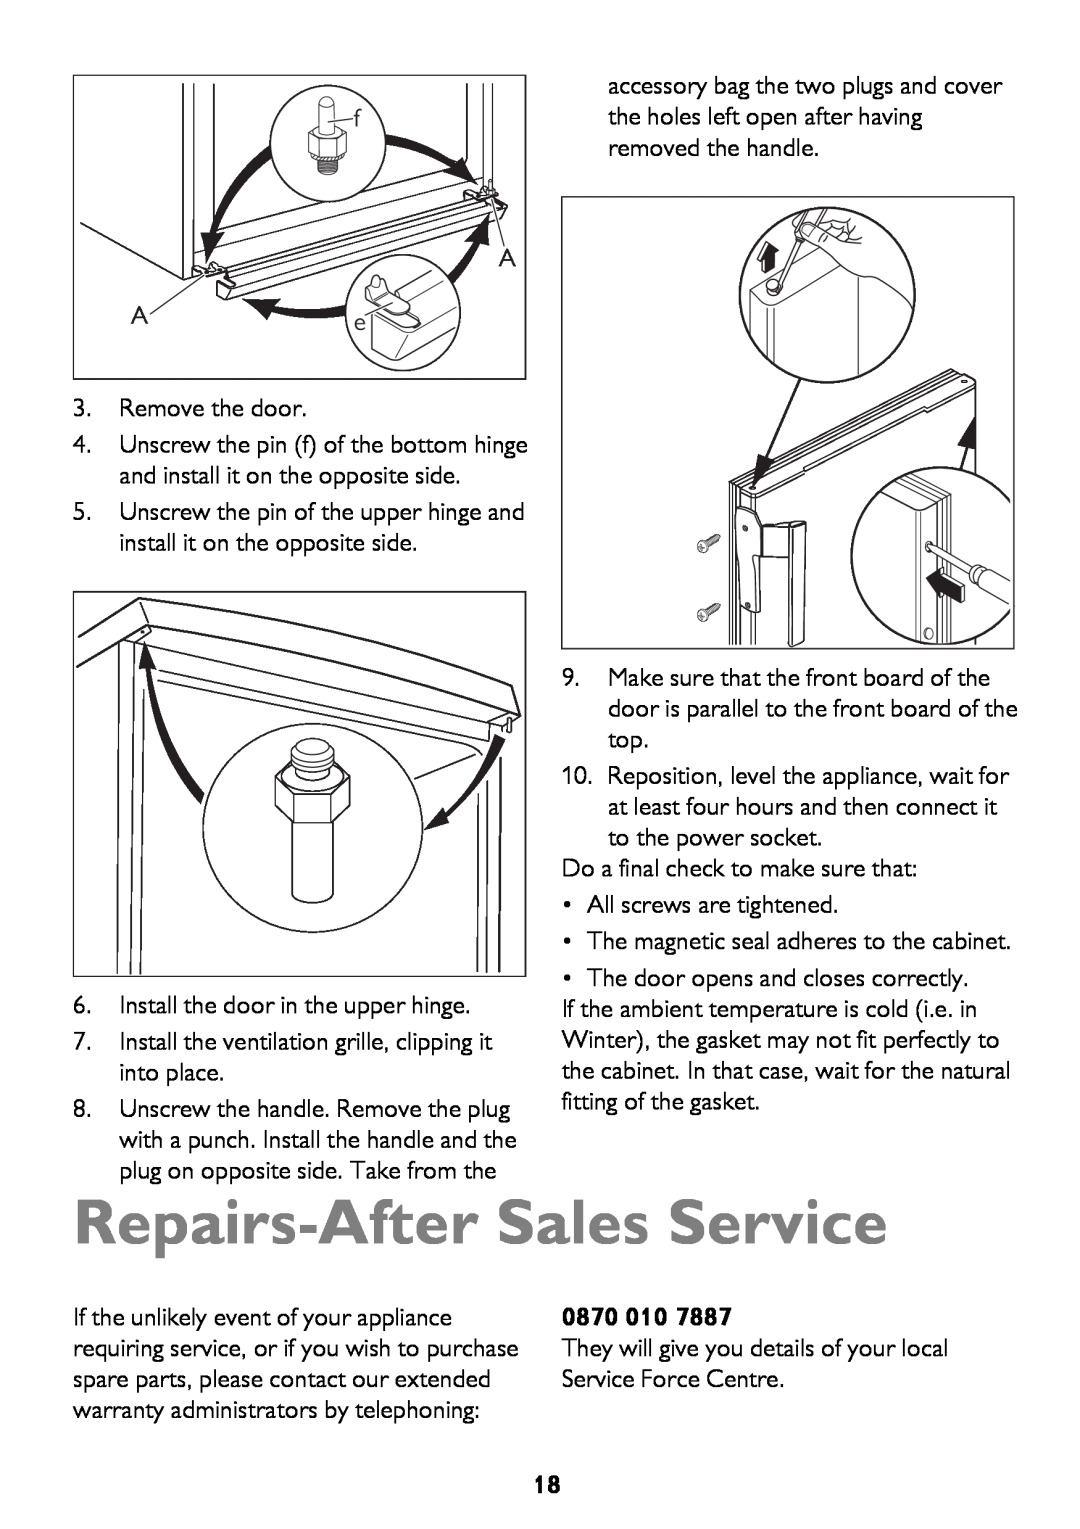 John Lewis JLLFW1602 instruction manual Repairs-After Sales Service, 0870 